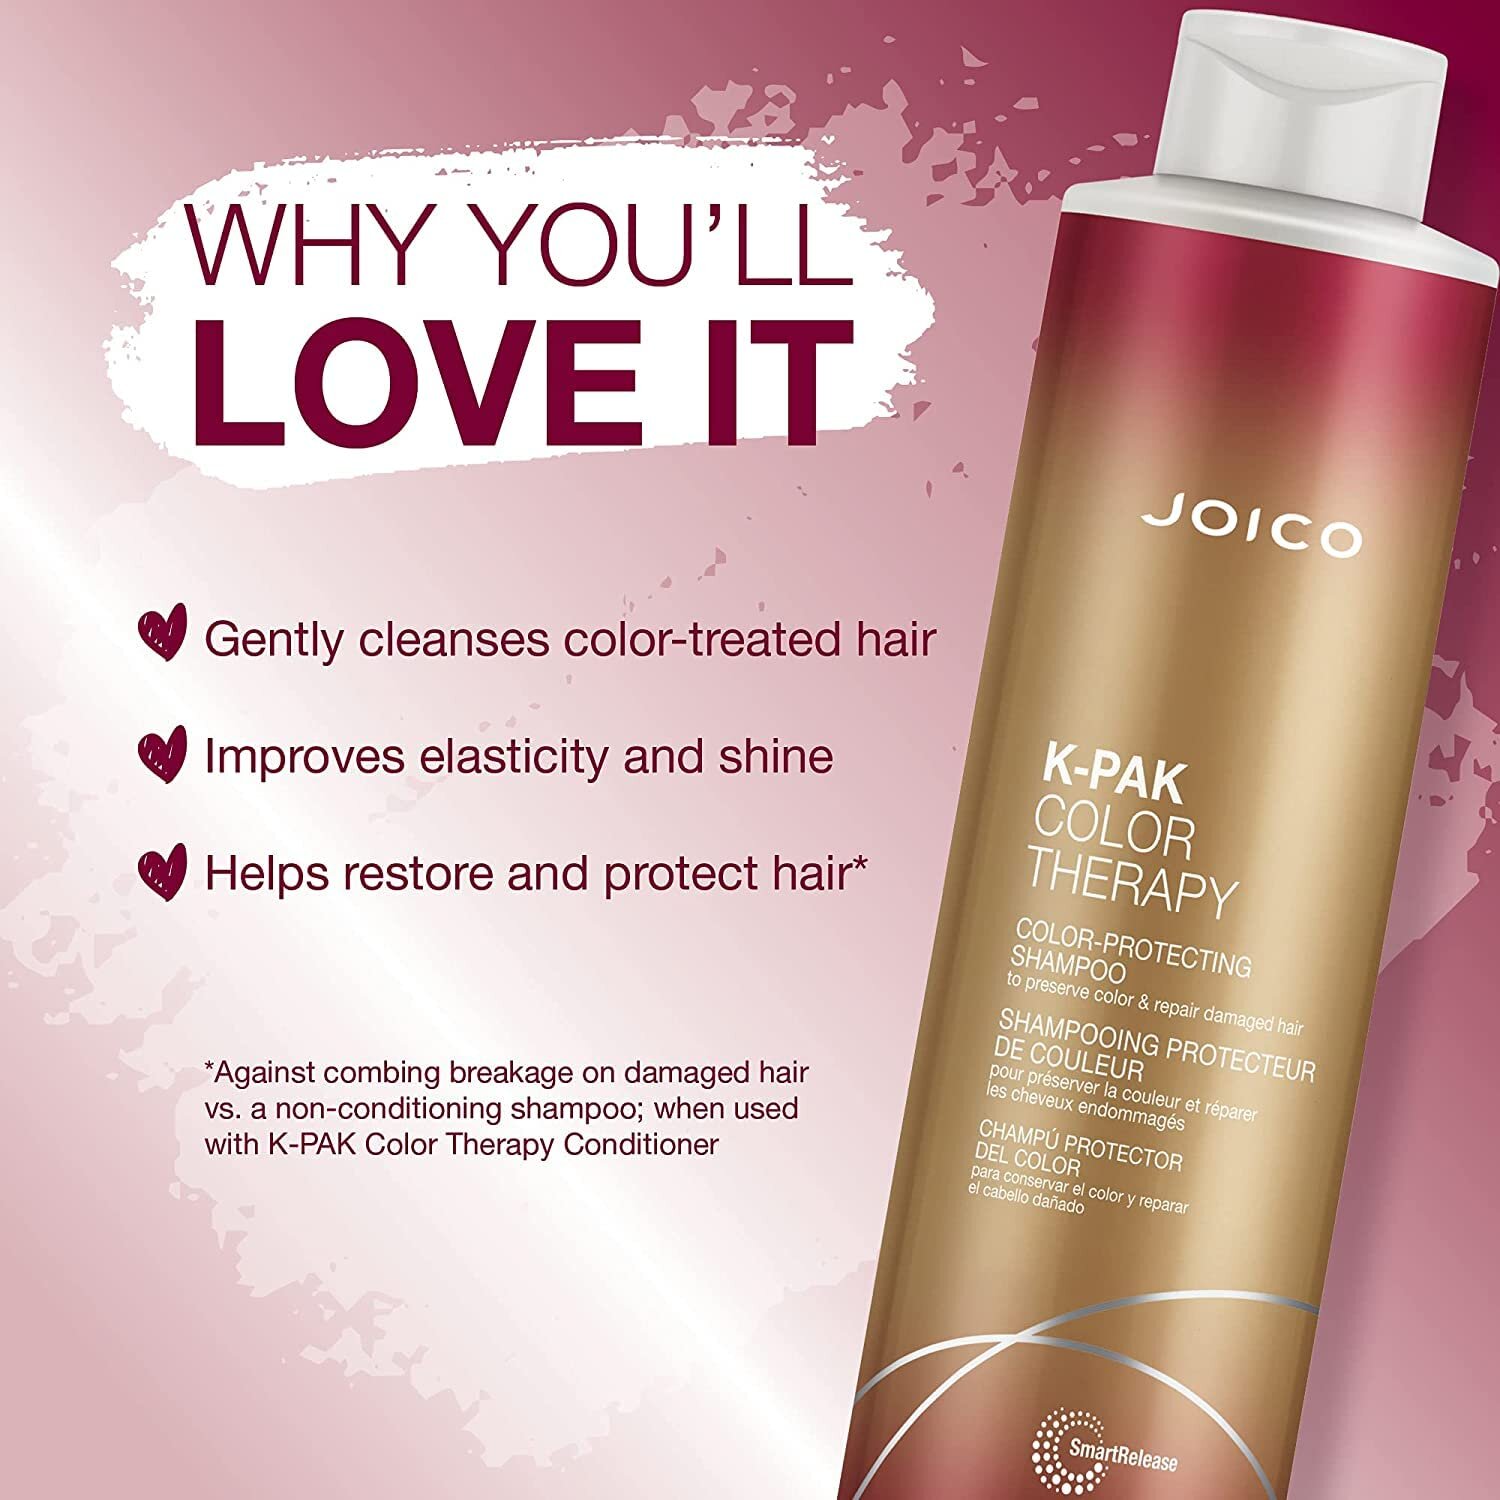 K-Pak Color Therapy kit by Joico for Unisex - 2 Pc Kit 33.8 oz Shampoo, 33.8 oz Conditioner - image 3 of 6